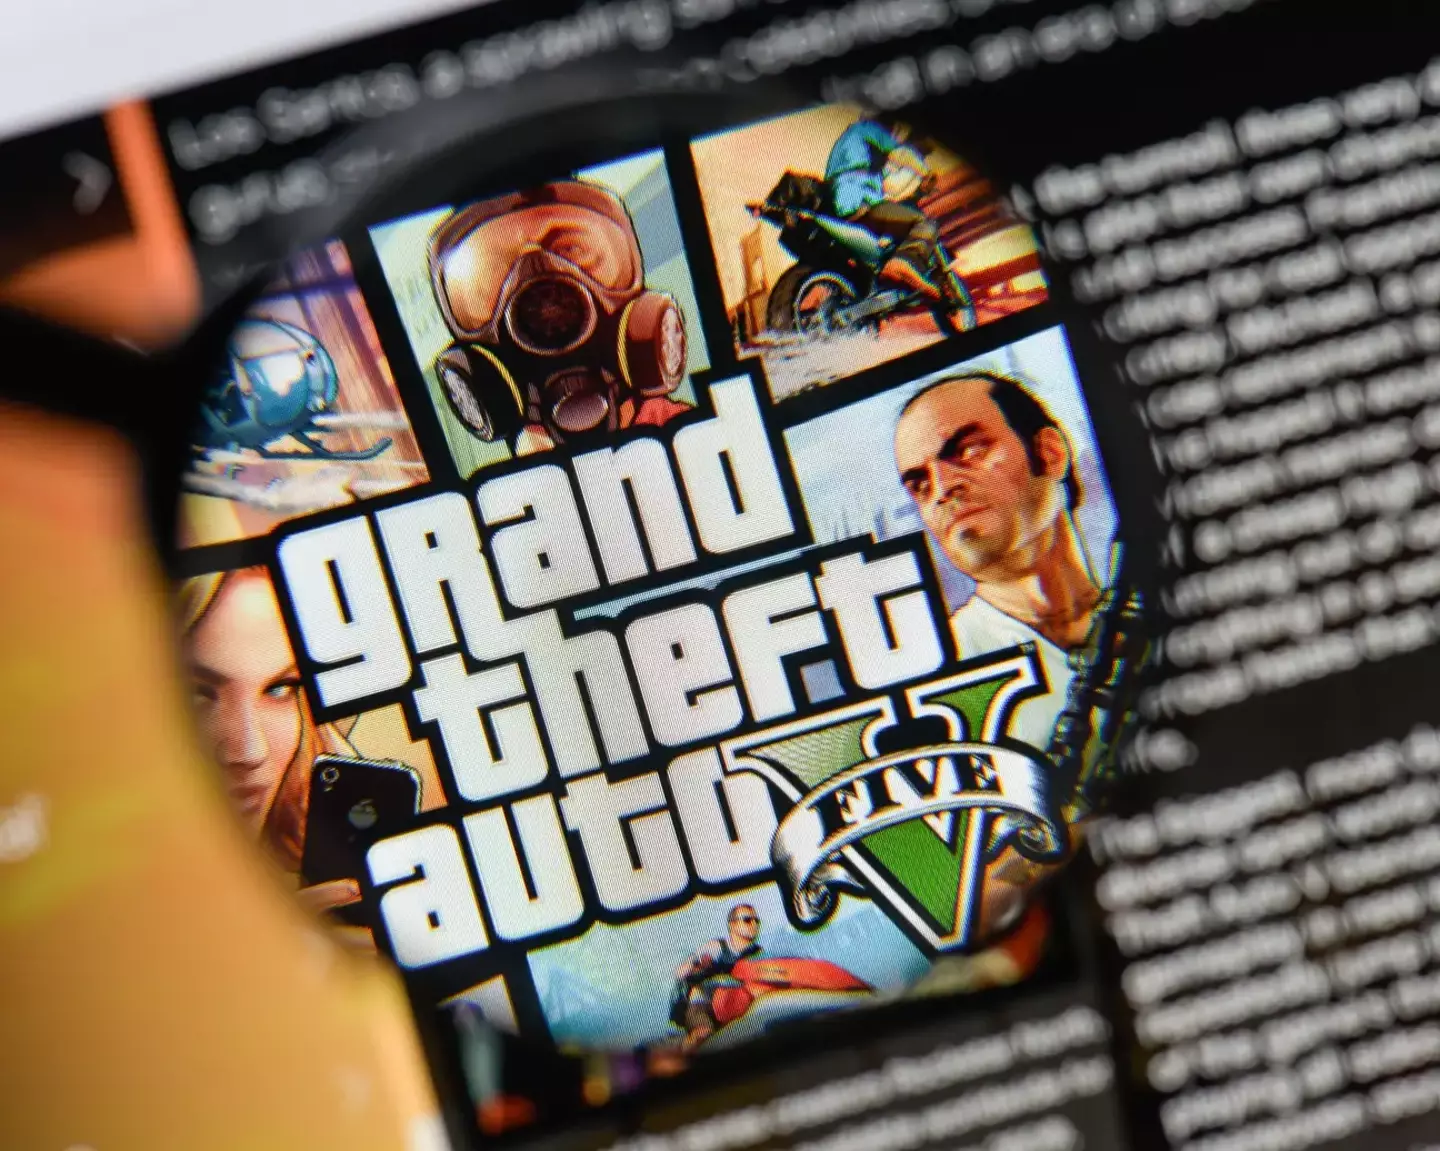 Rockstar Games is working to remove some of Grand Theft Auto's problematic features.